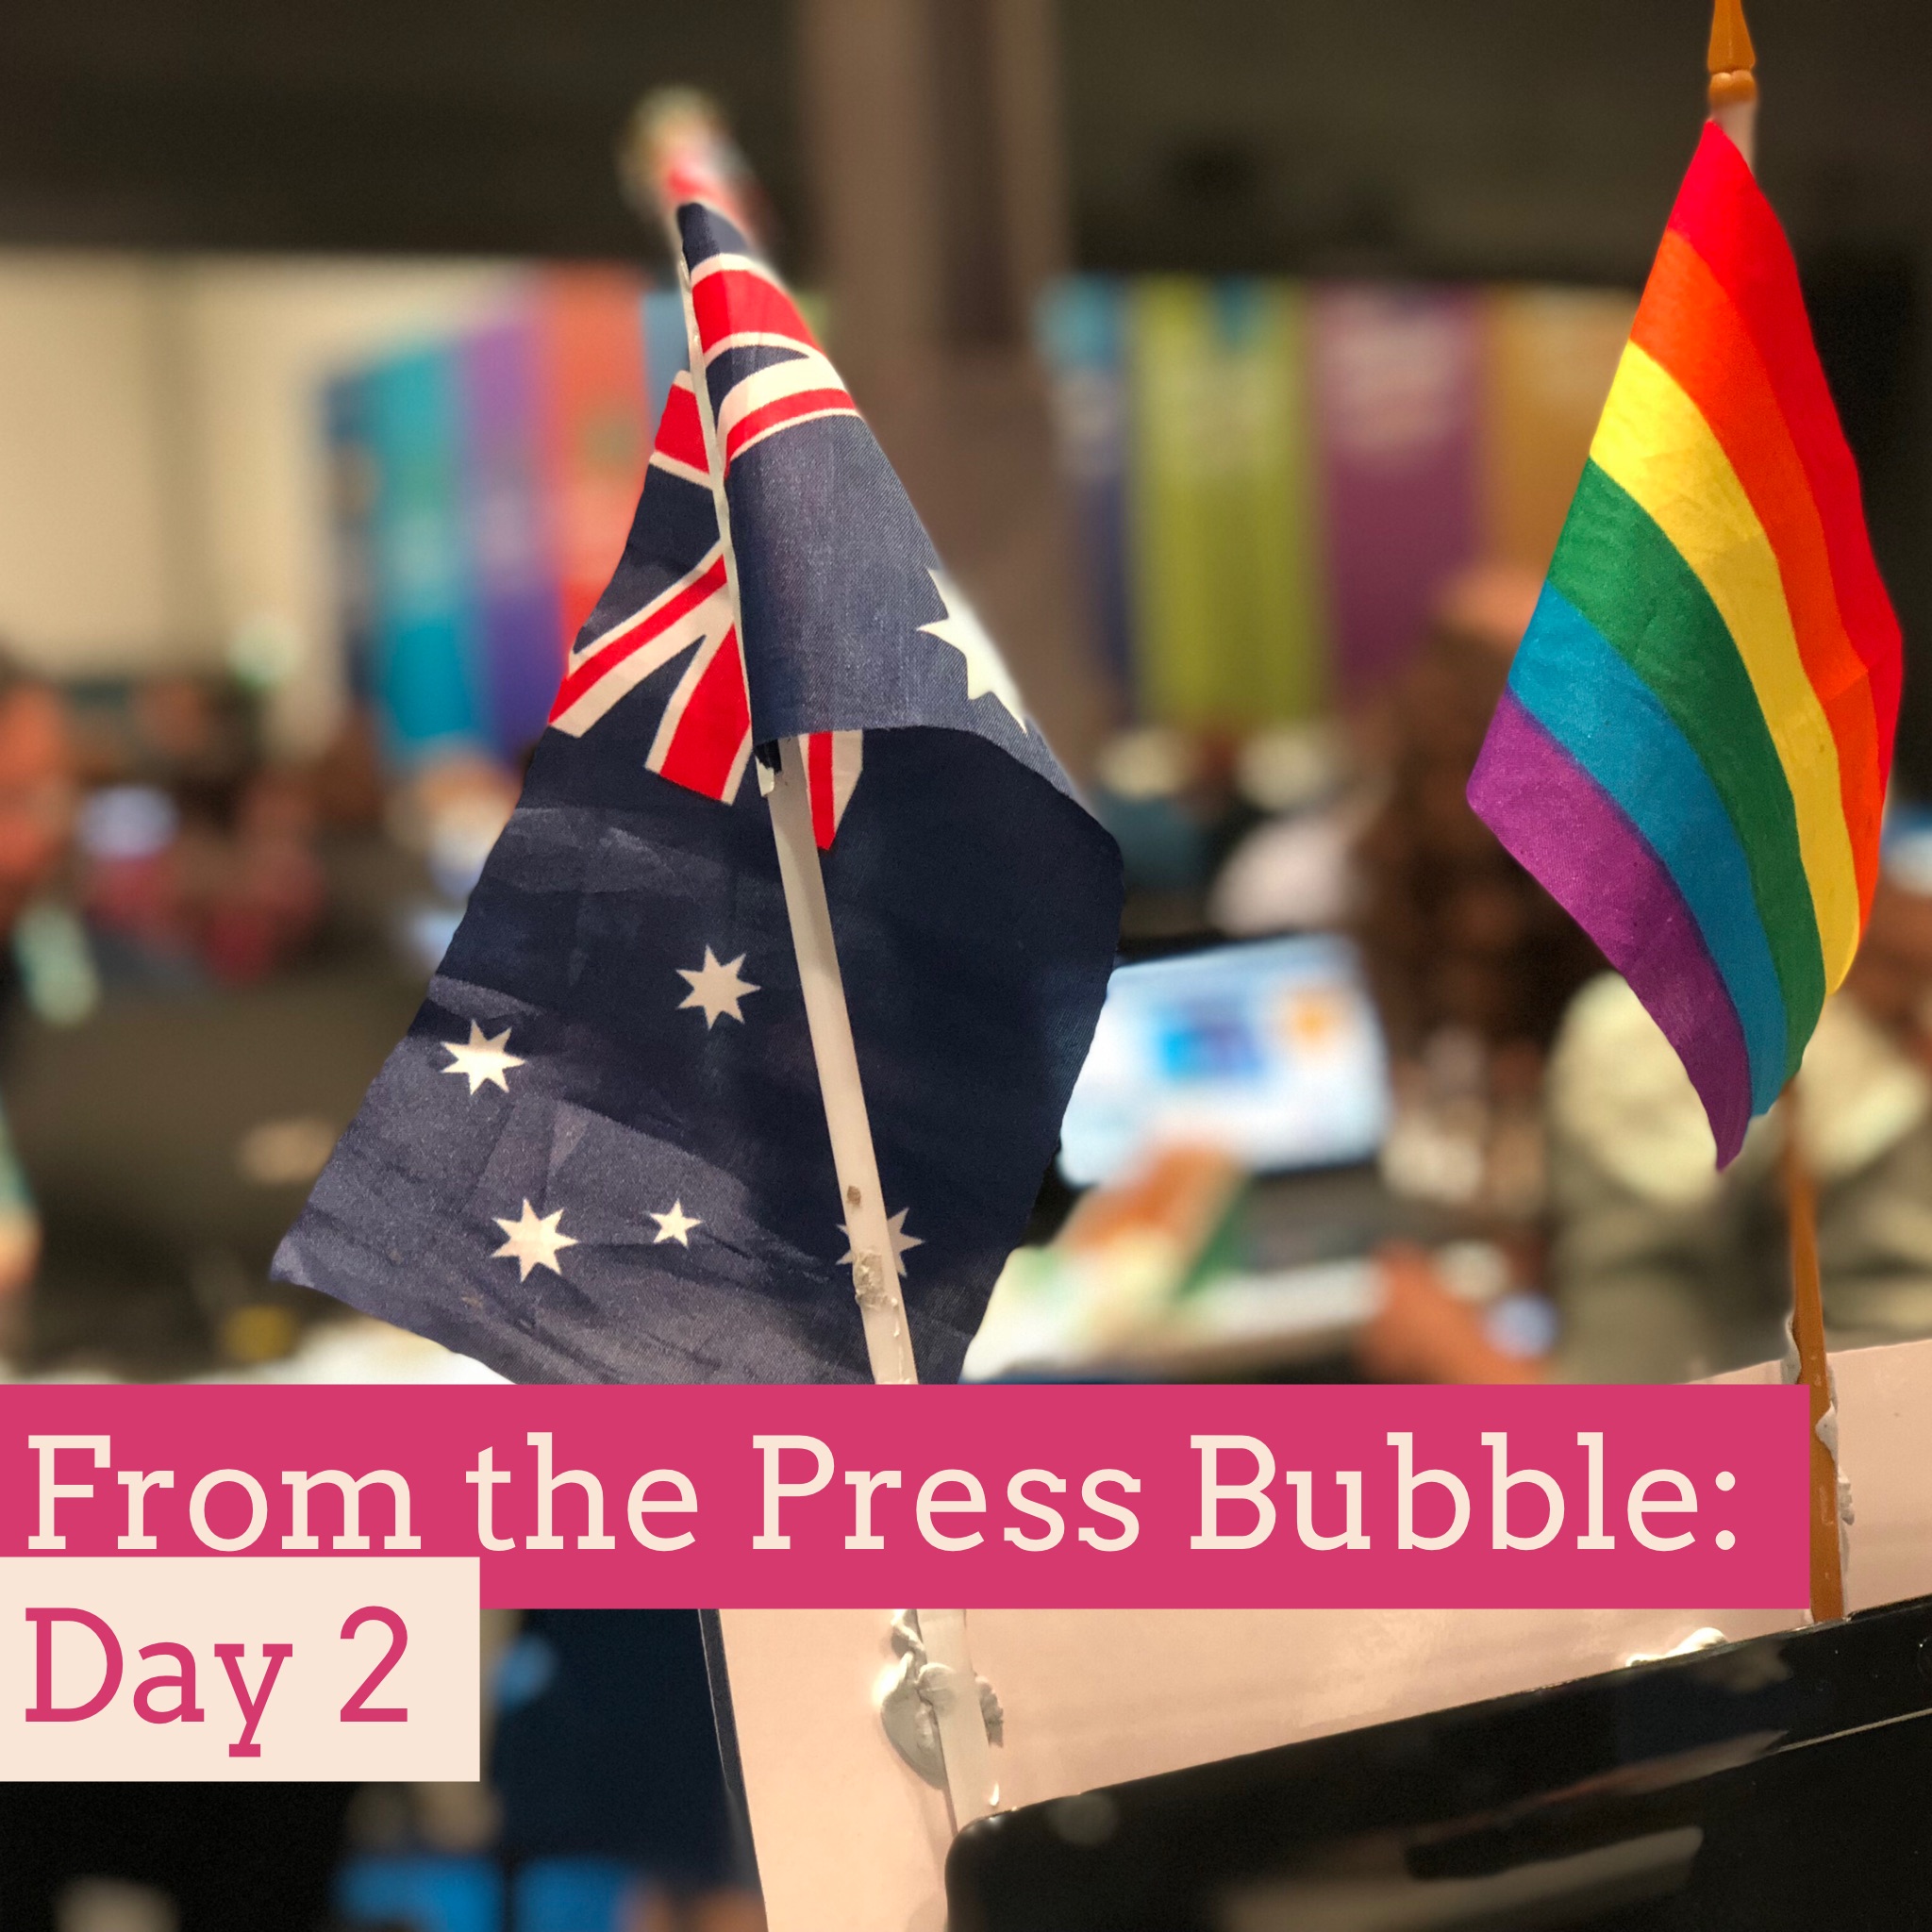 From the 2018 Press Bubble: Day 2